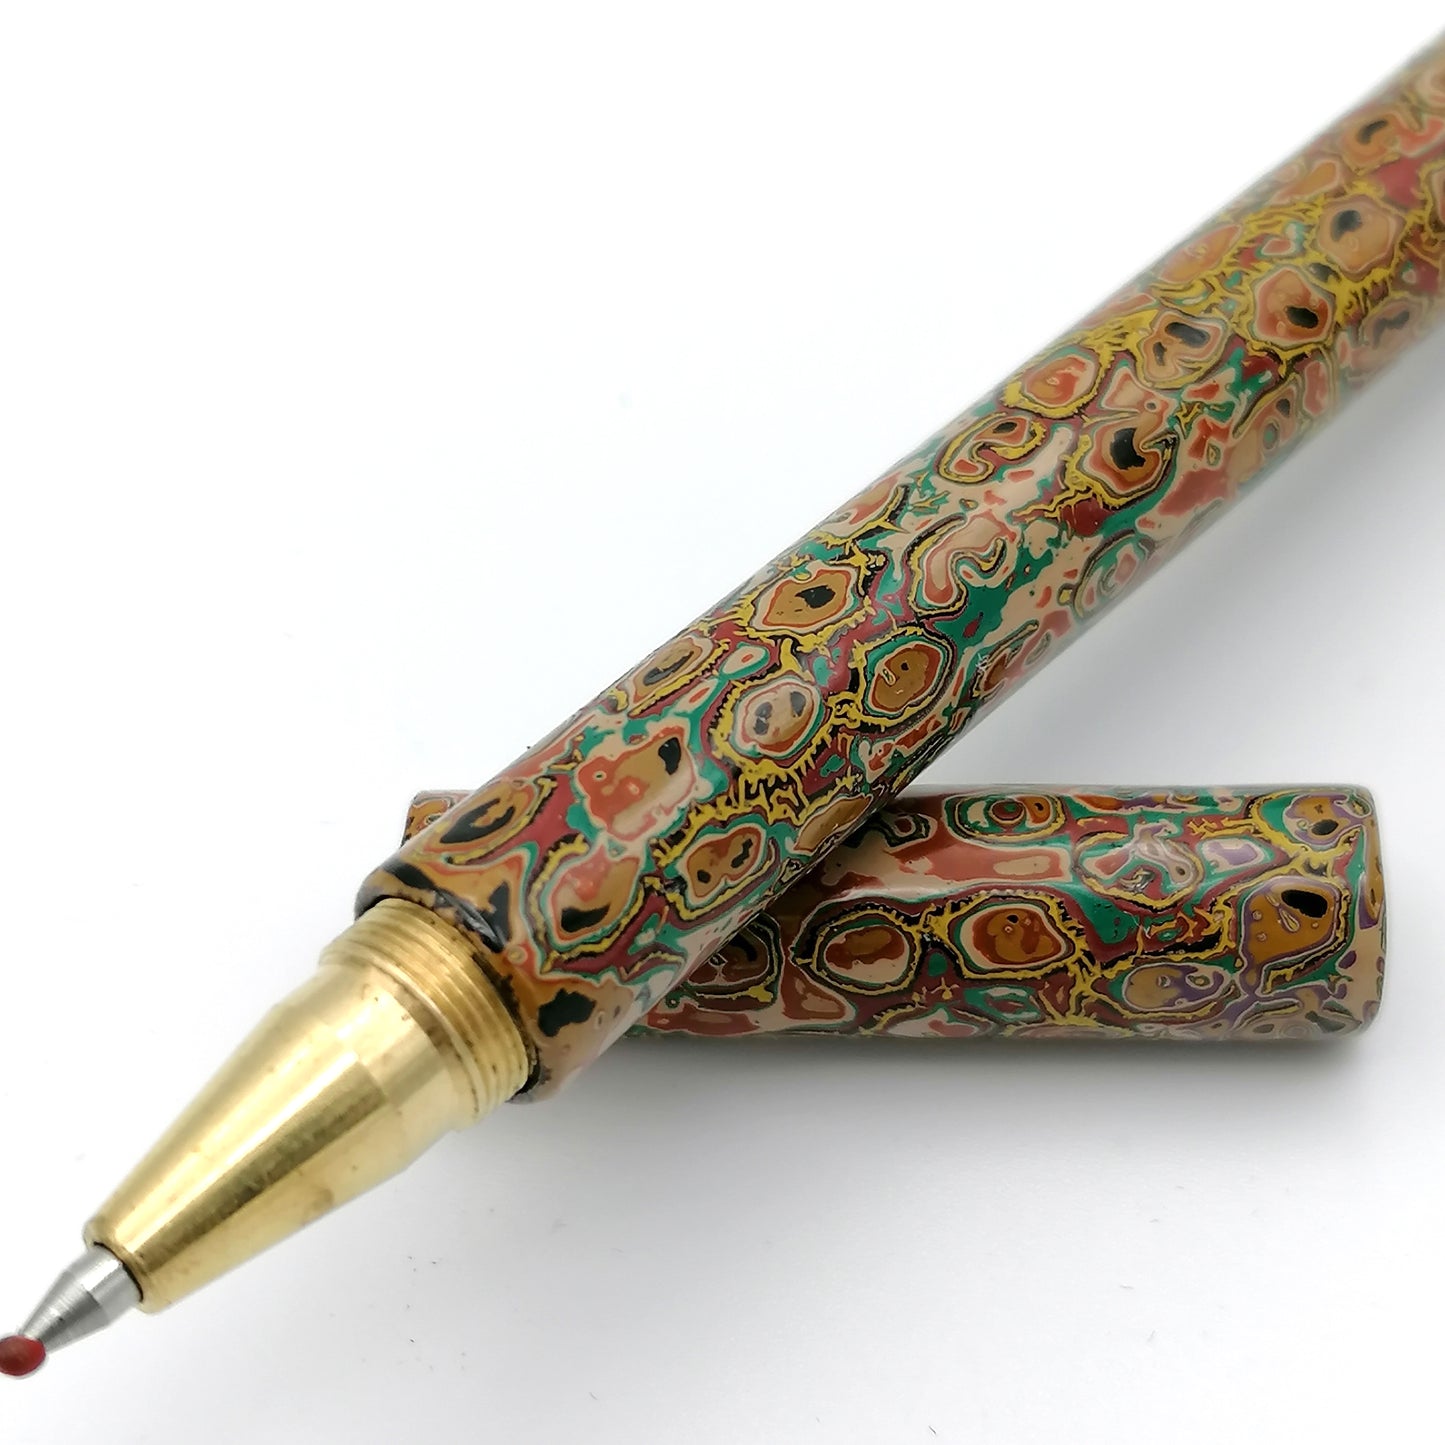 Tambo Solid Brass Pen in greens yellows and oranges